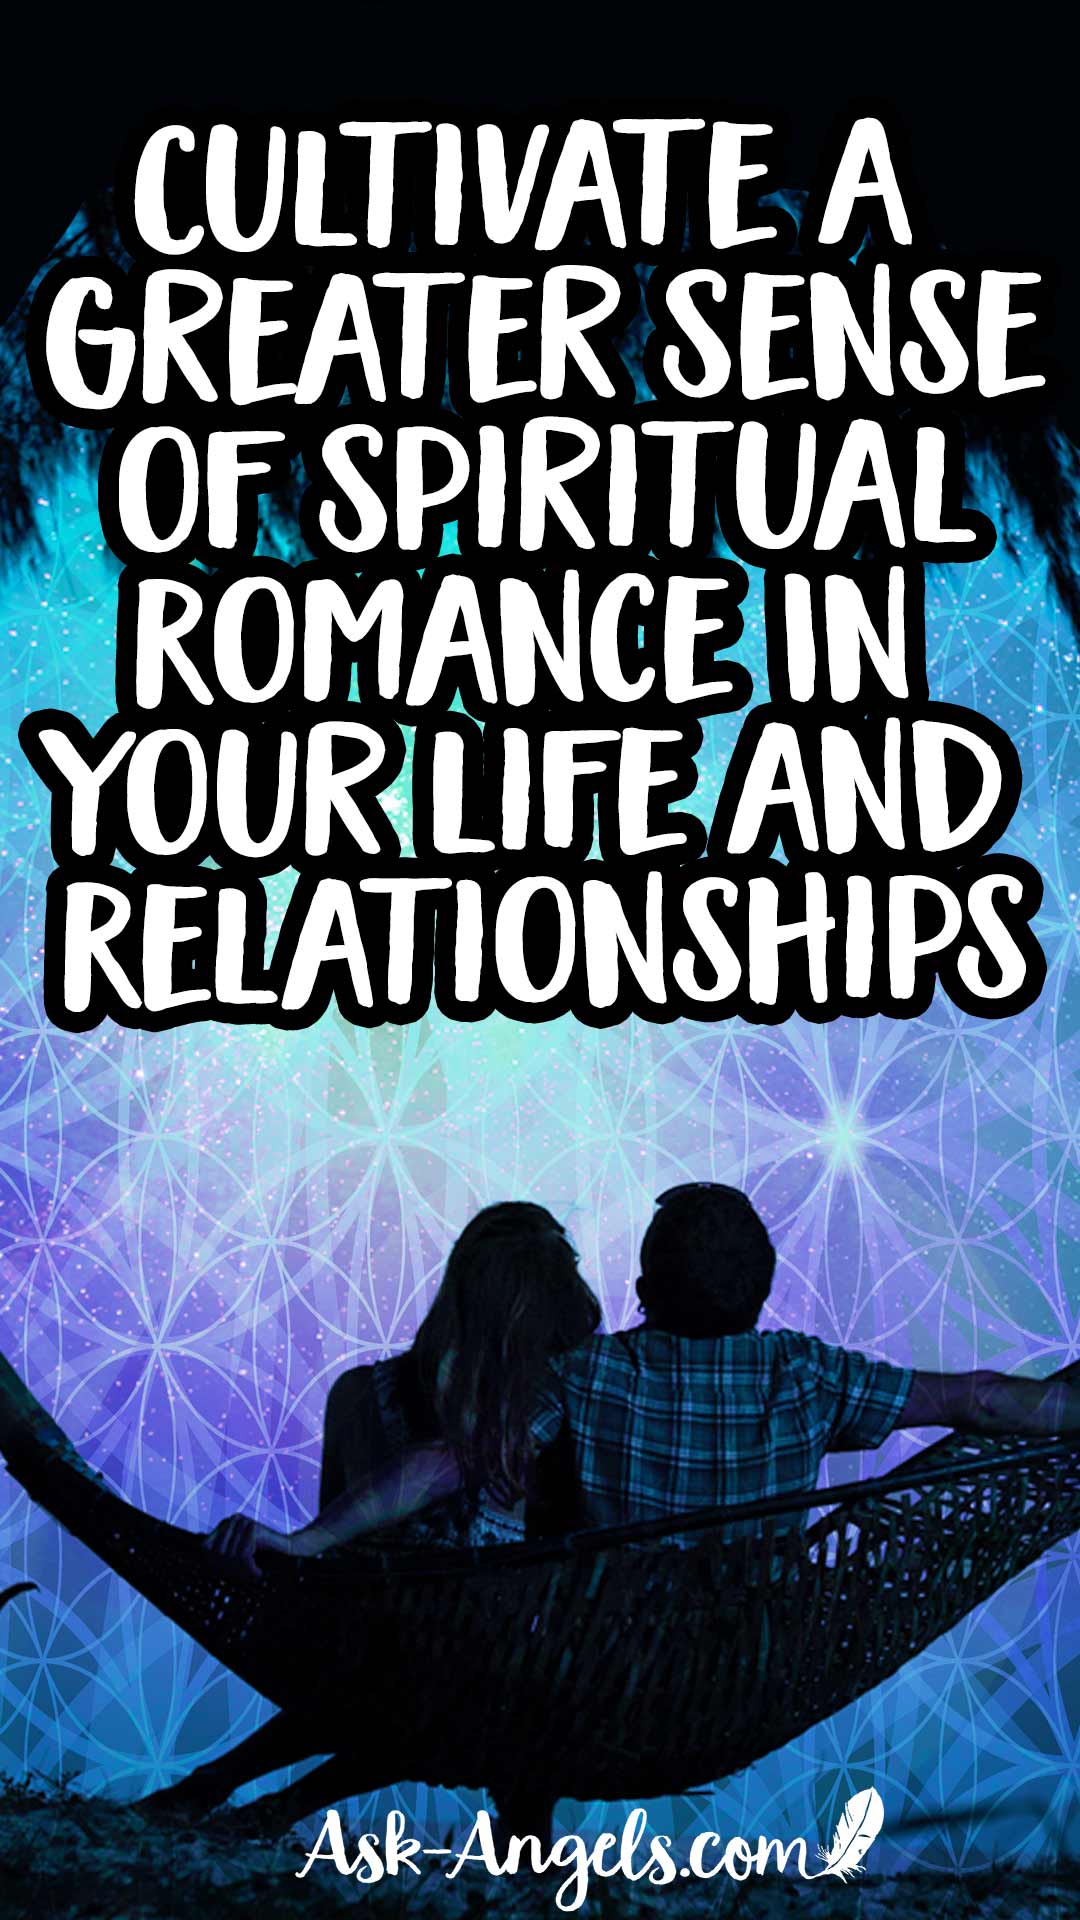 Cultivate A Greater Sense of Spiritual Romance In Your Life and Relationships